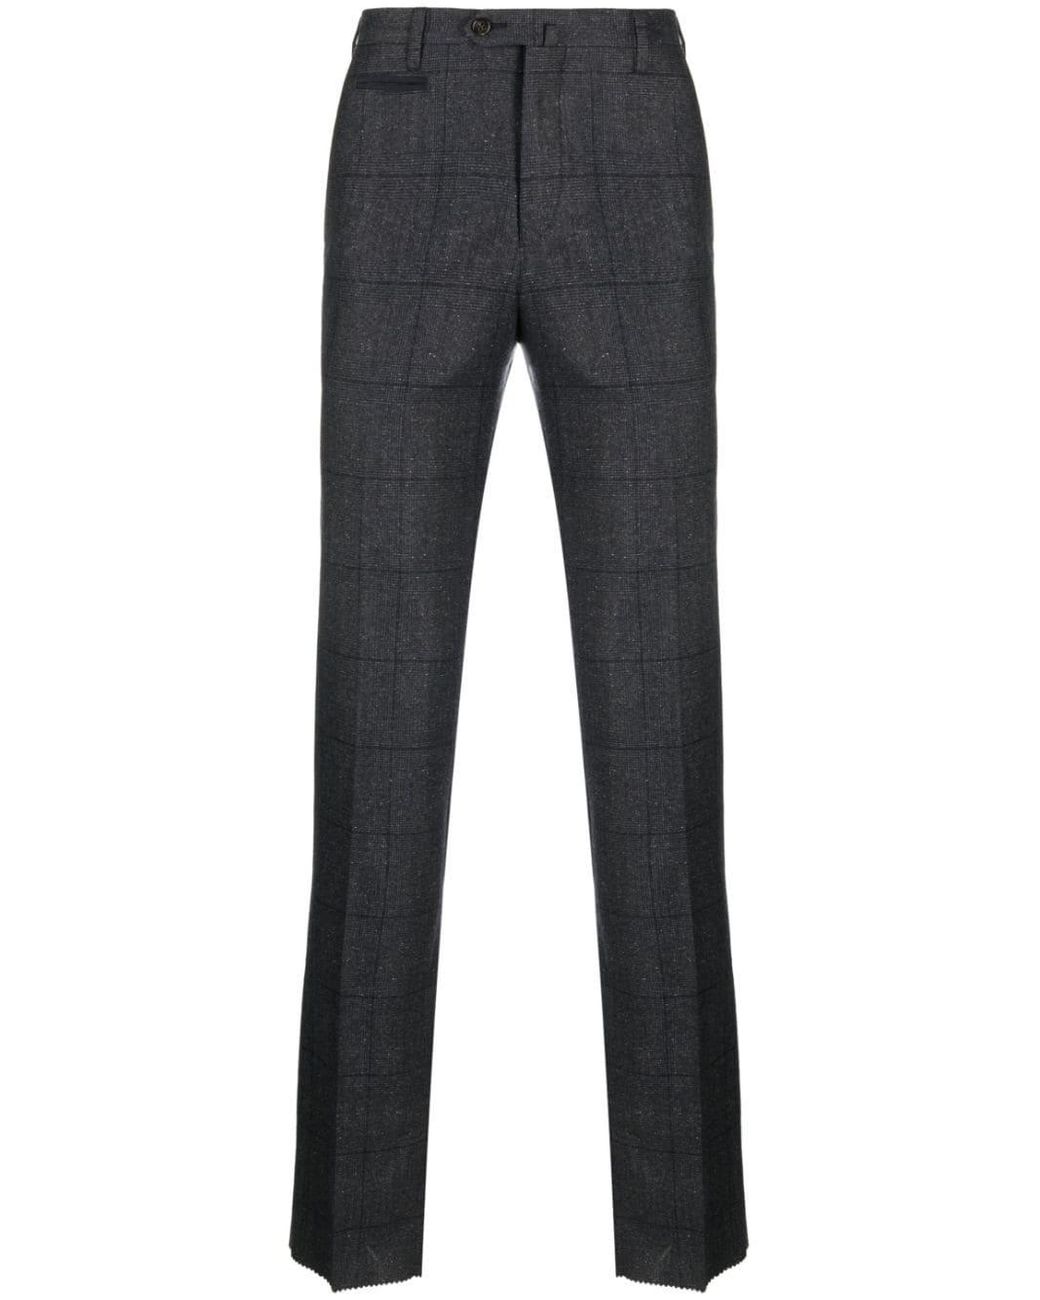 Grid Pants for Men  Up to 72 off  Lyst